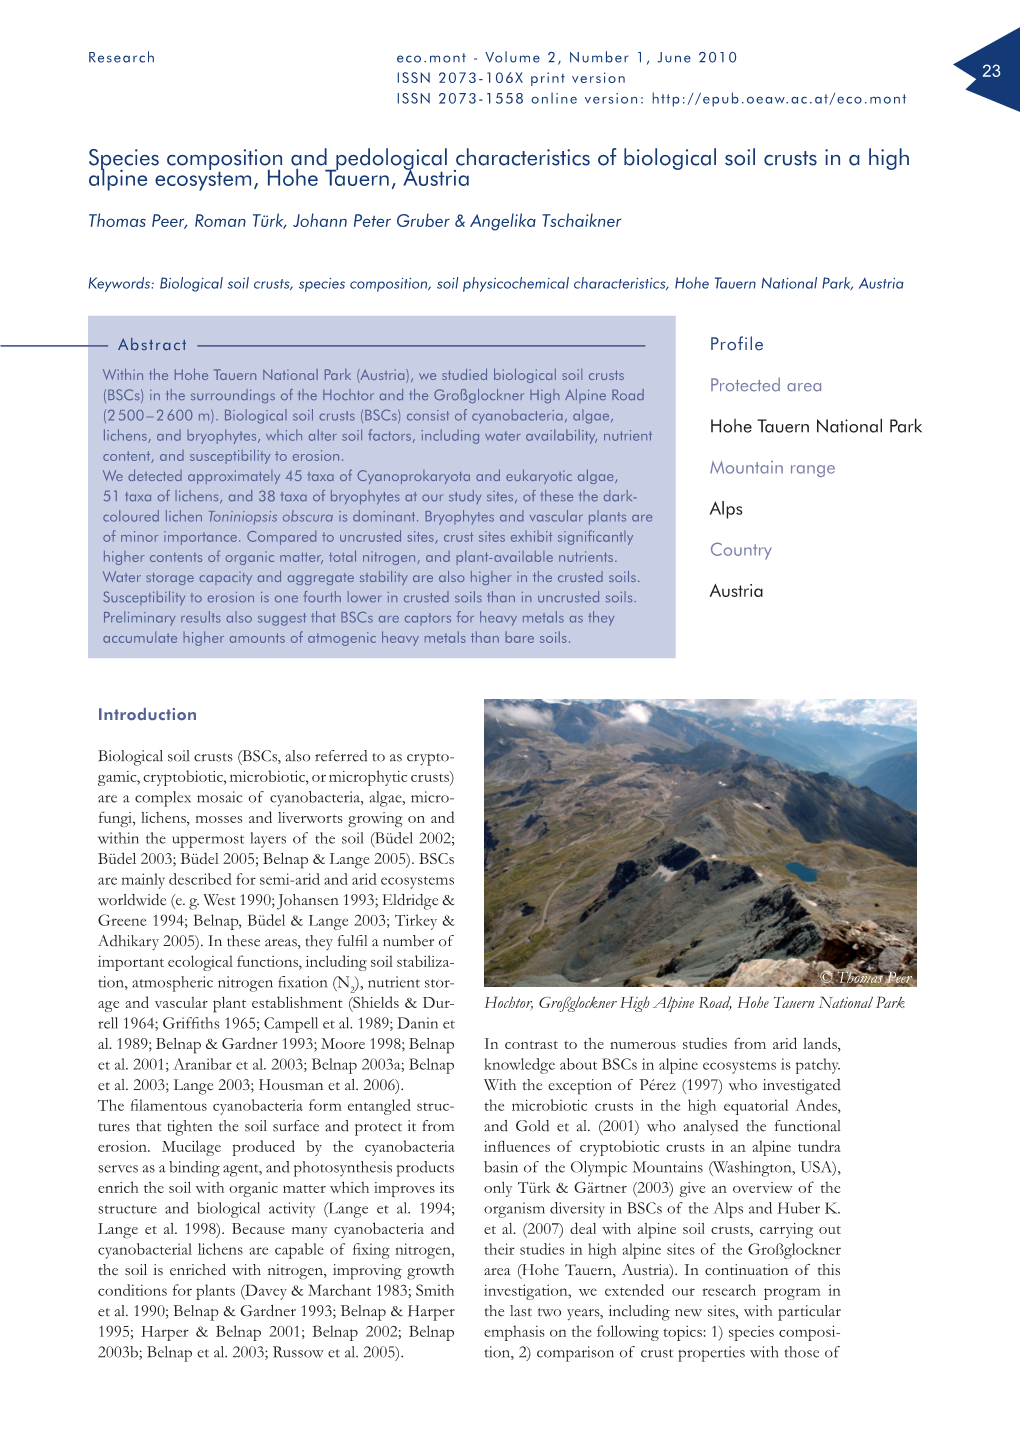 Species Composition and Pedological Characteristics of Biological Soil Crusts in a High Alpine Ecosystem, Hohe Tauern, Austria